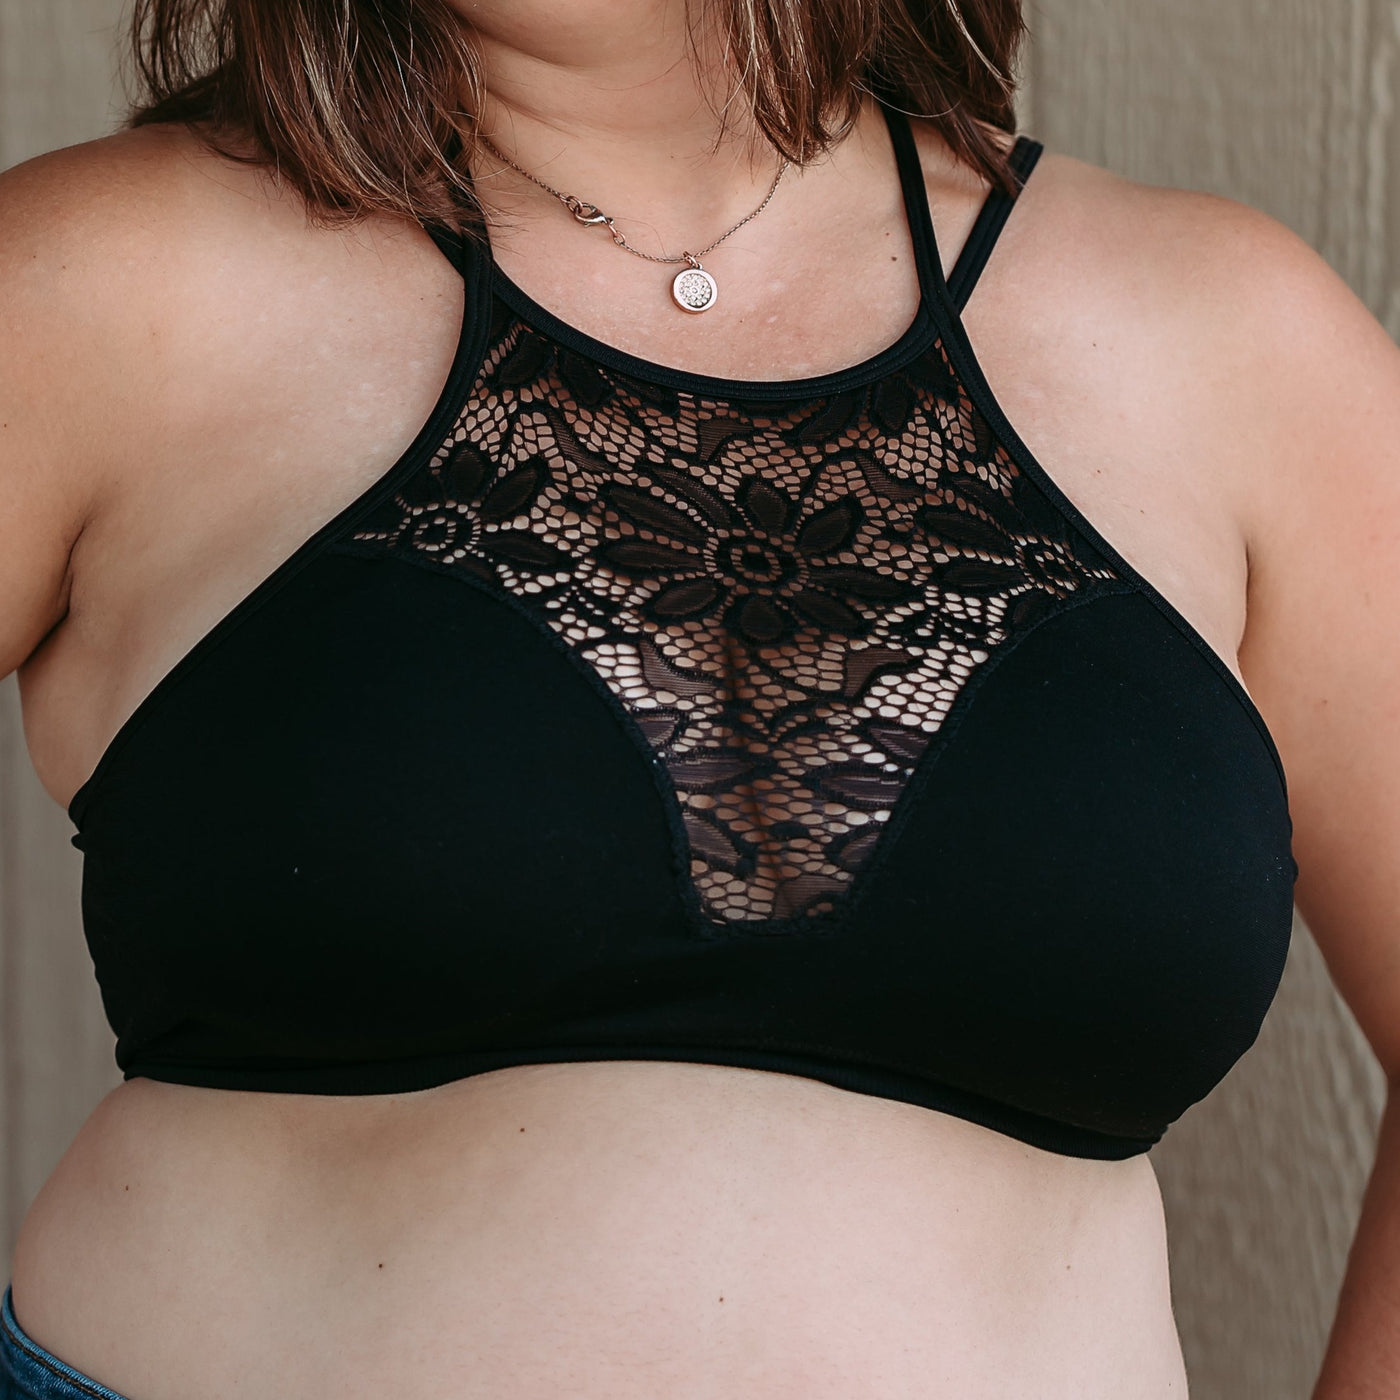 Sophisticated Lace Cutout Bralette in Black